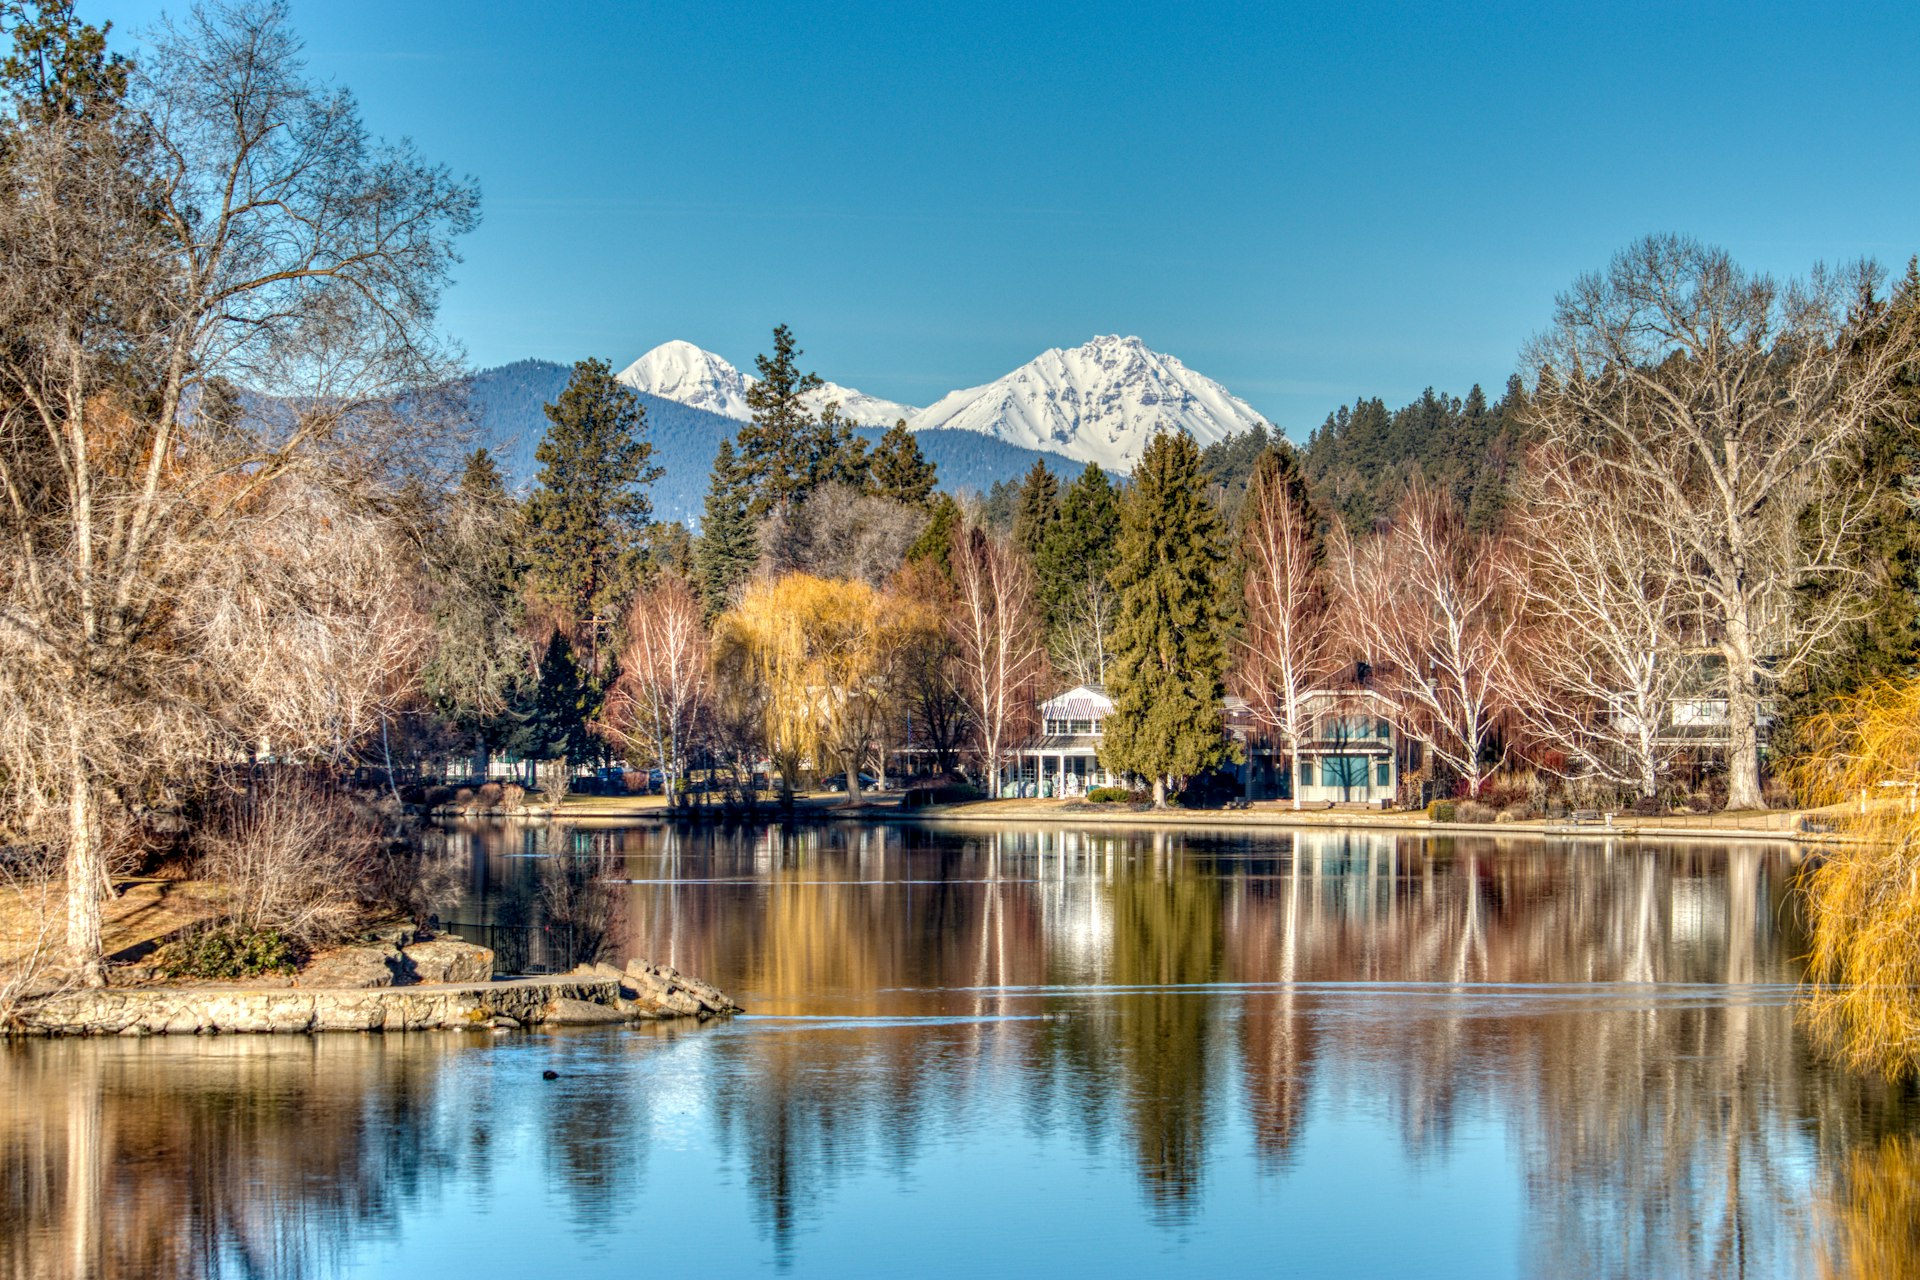 A view of homes around Mirror Pond with snowy mountains in the distance in Bend, Oregon, Pacific Northwest, USA